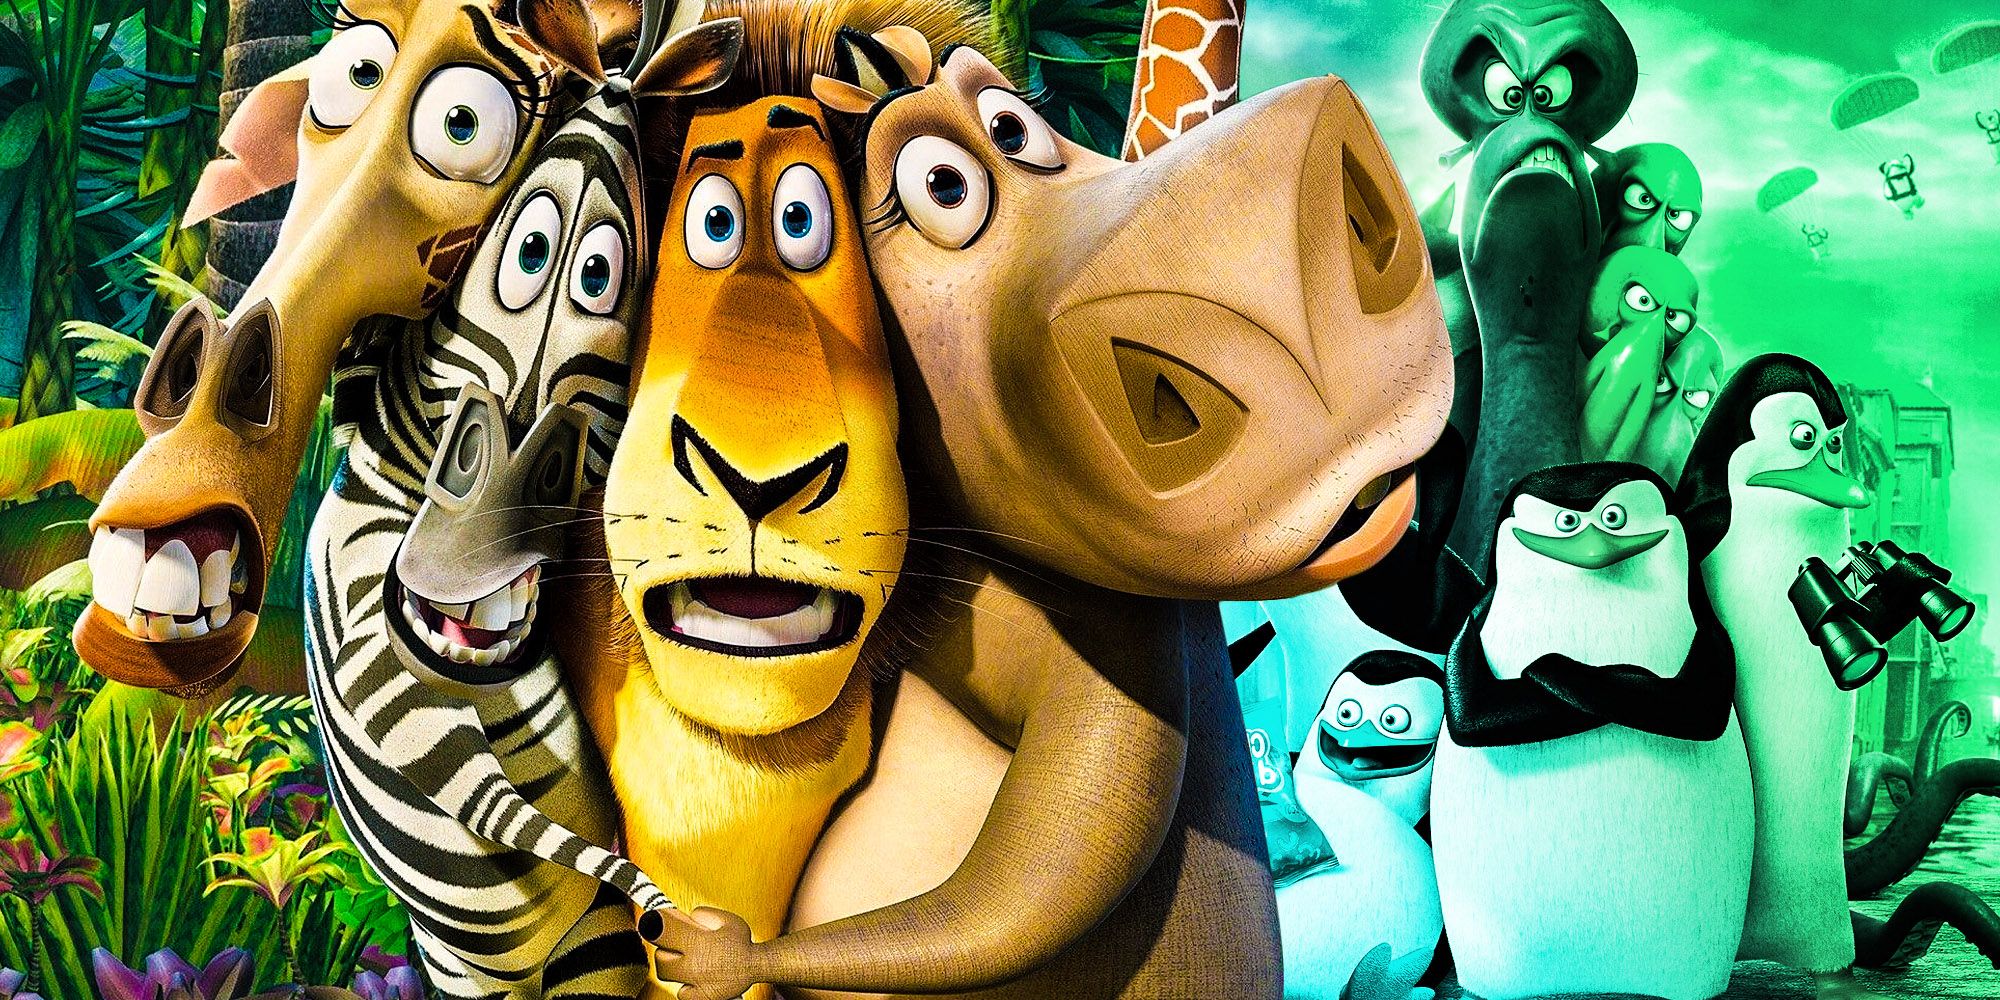 Madagascar movies ranked from worst to best penguins of madagascar